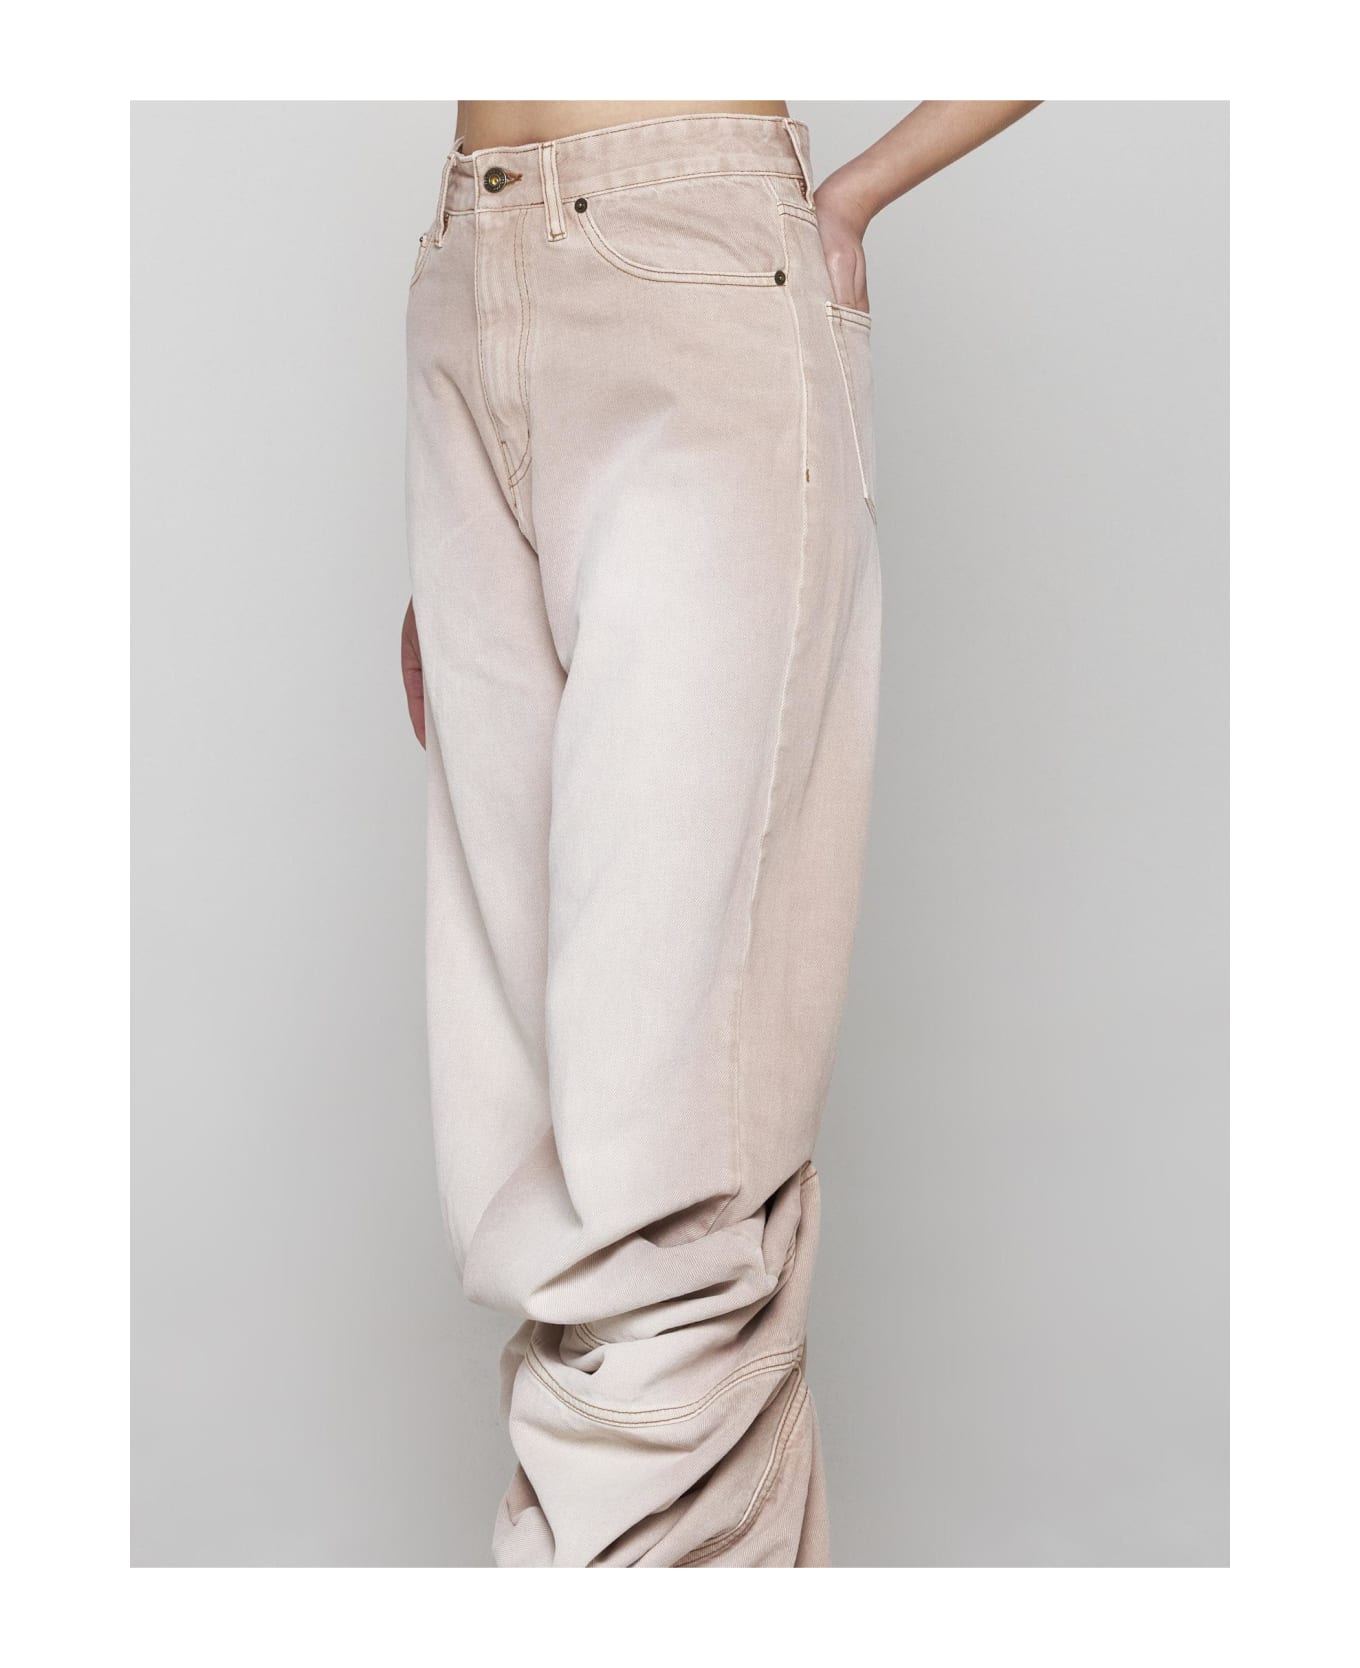 Y/Project Draped Cuff Jeans - Pink デニム